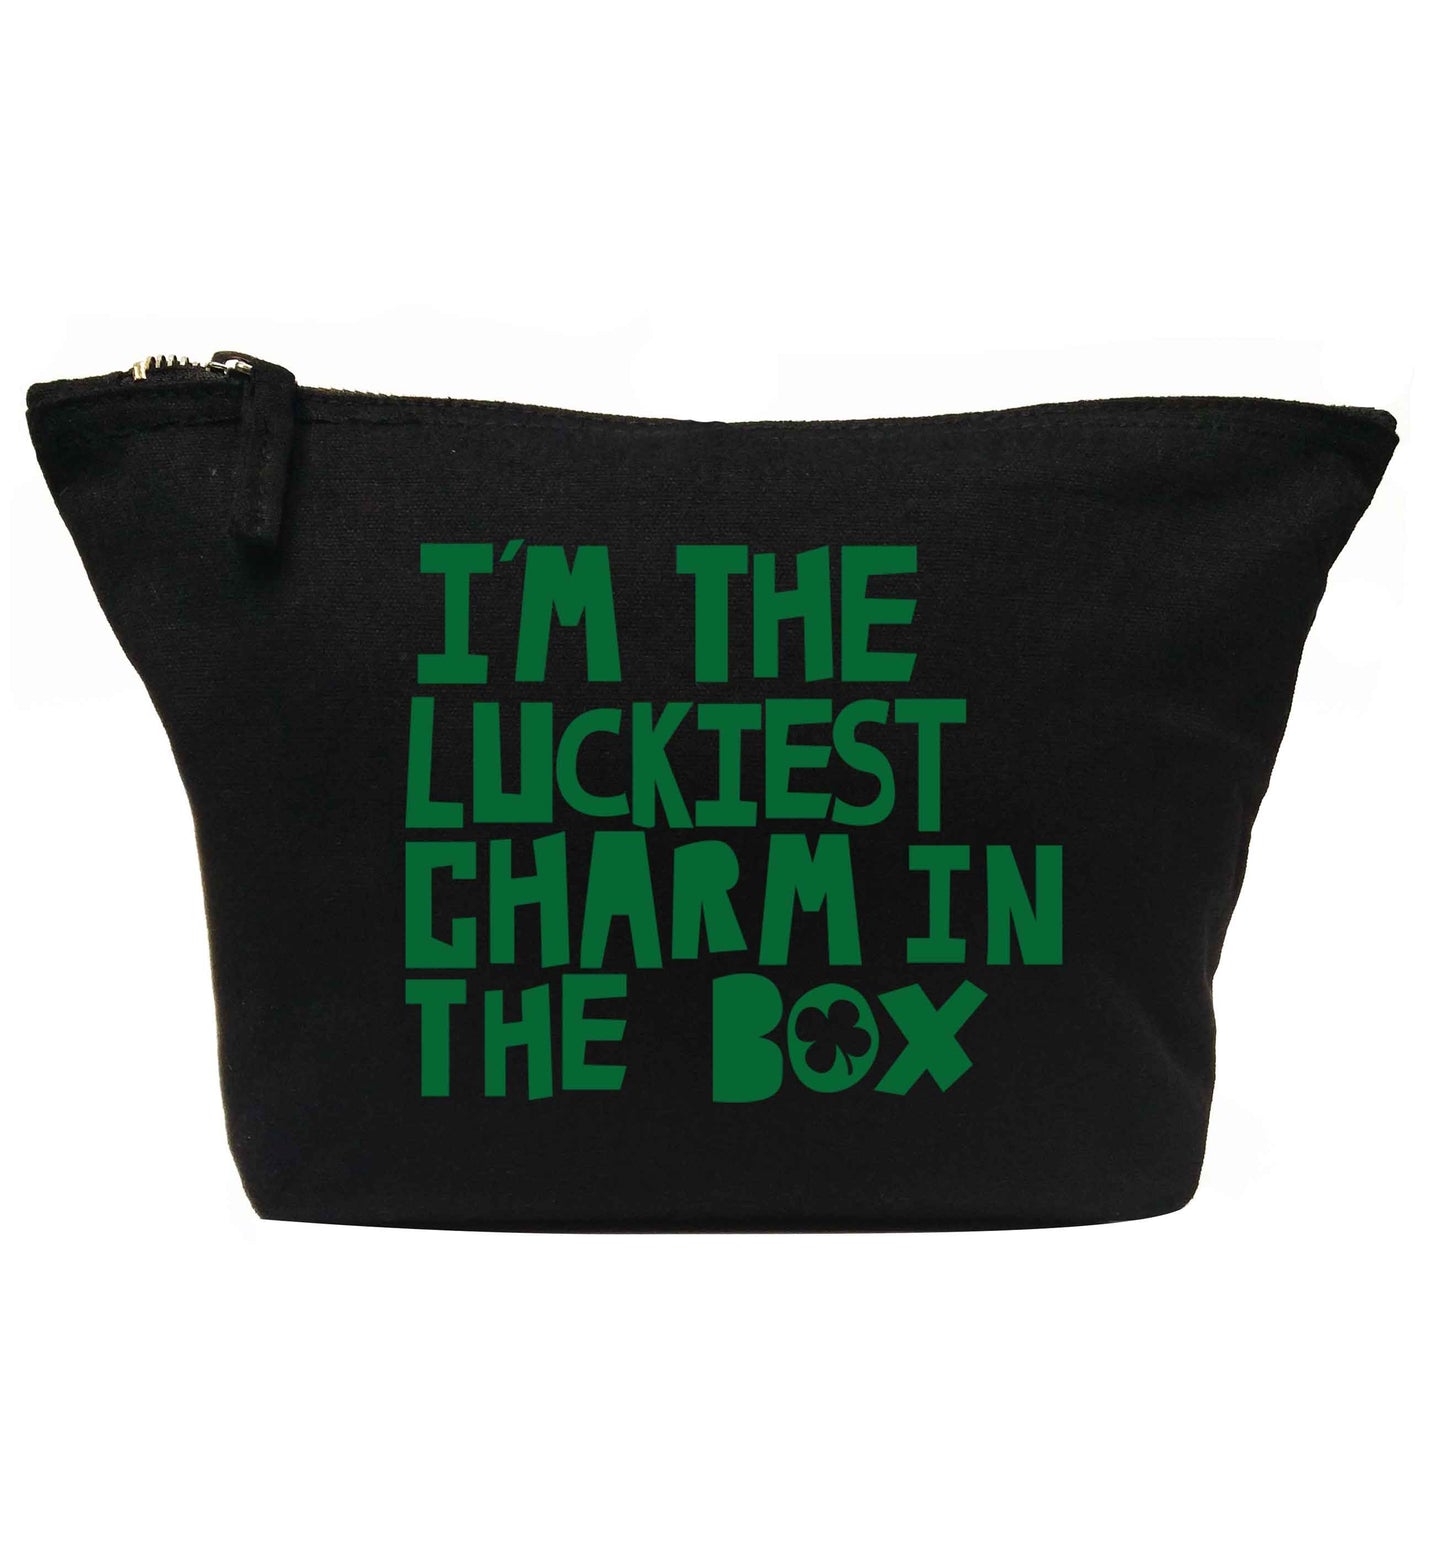 I'm the luckiest charm in the box | Makeup / wash bag